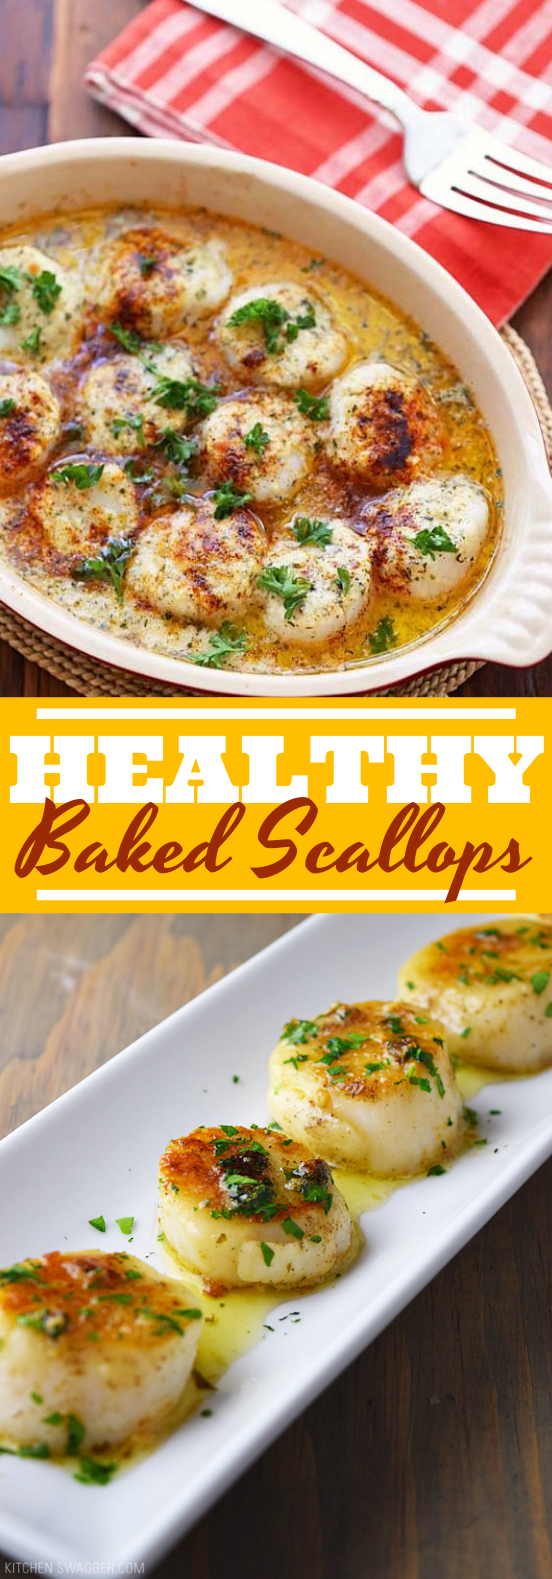 Baked Scallops #healthy #recipes #lowcarb #seafood #keto